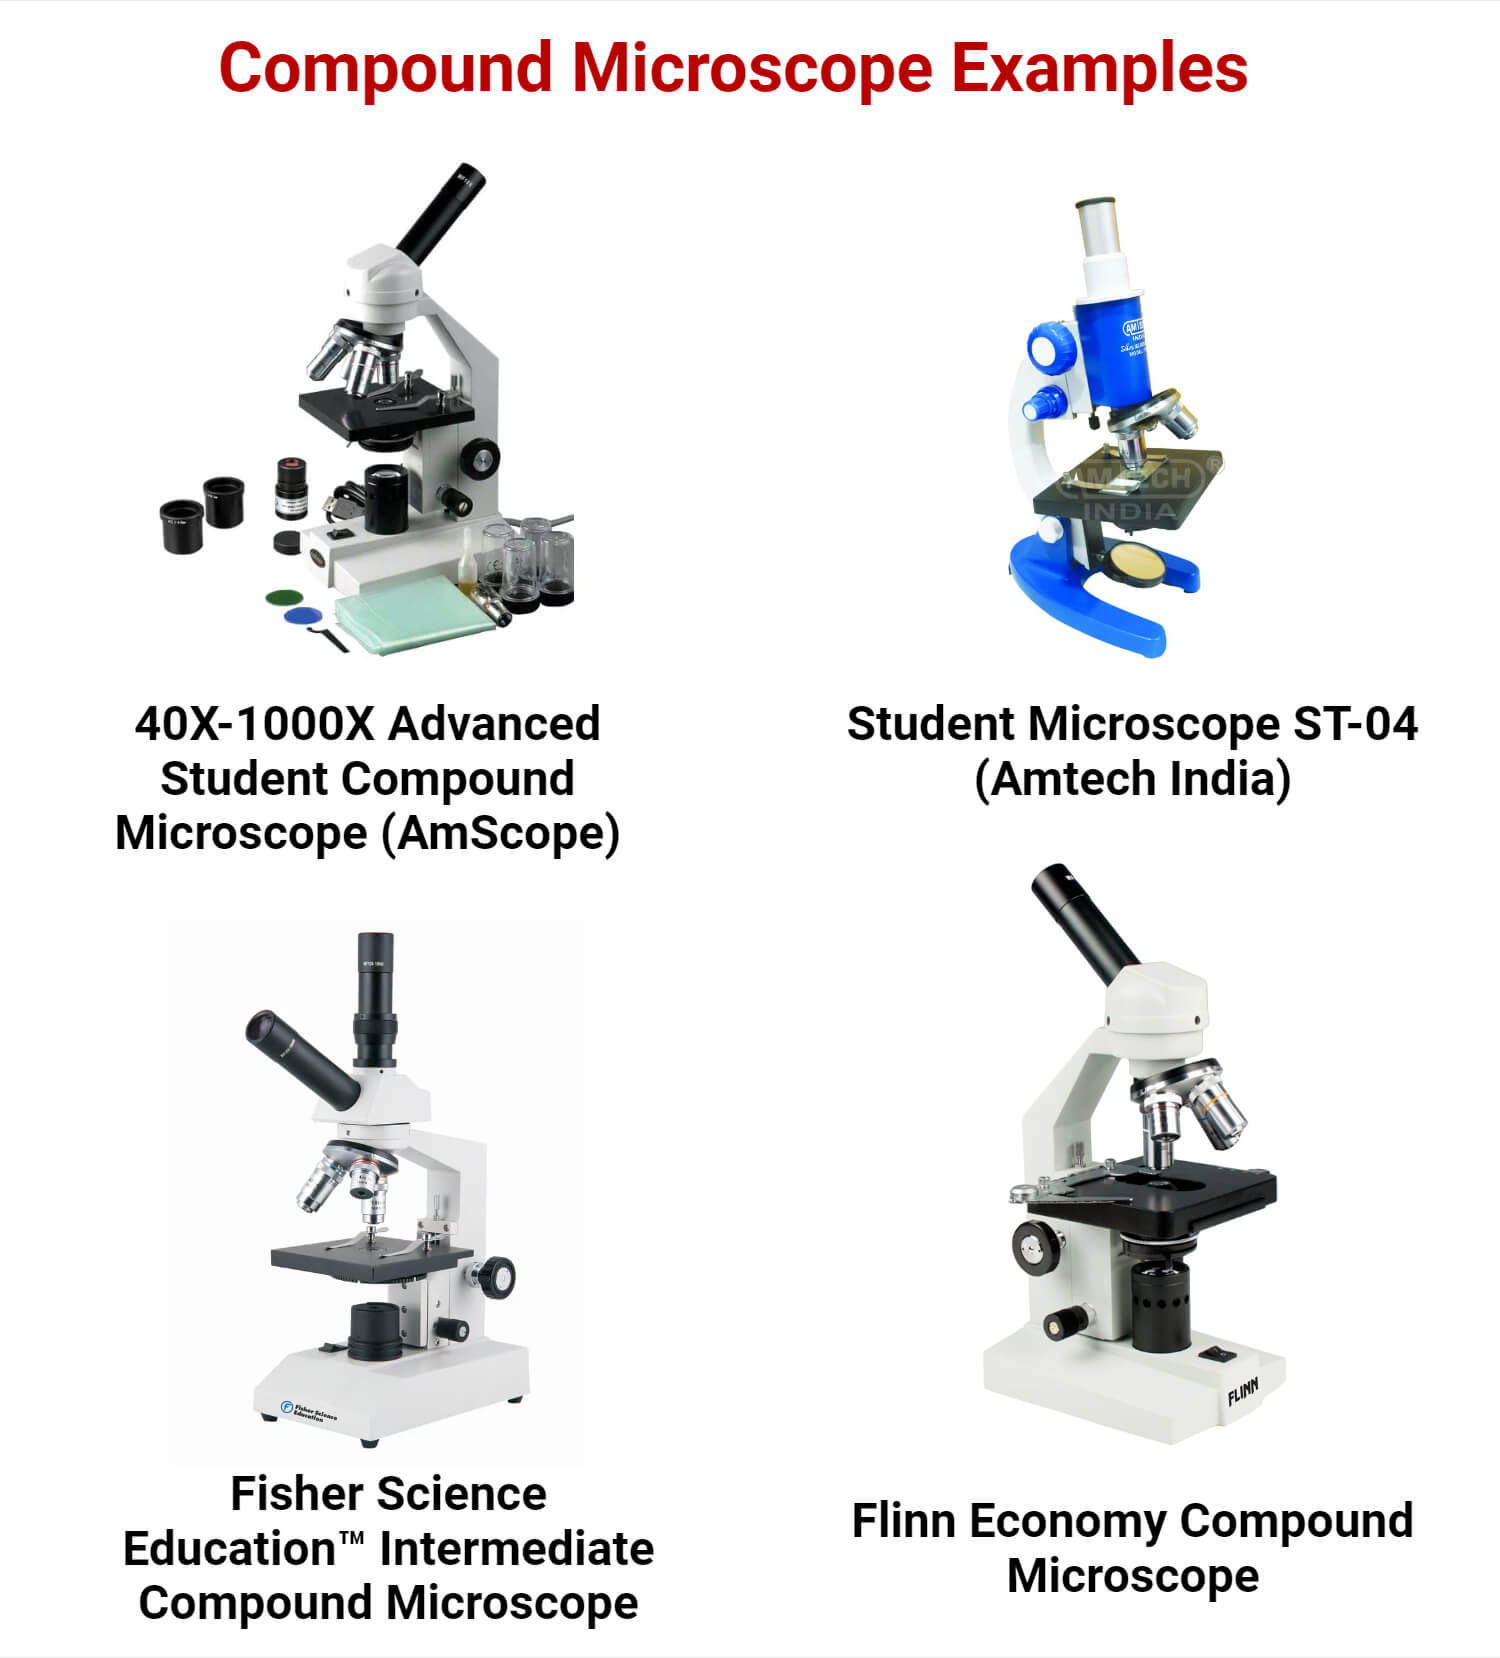 Examples of Compound Microscope